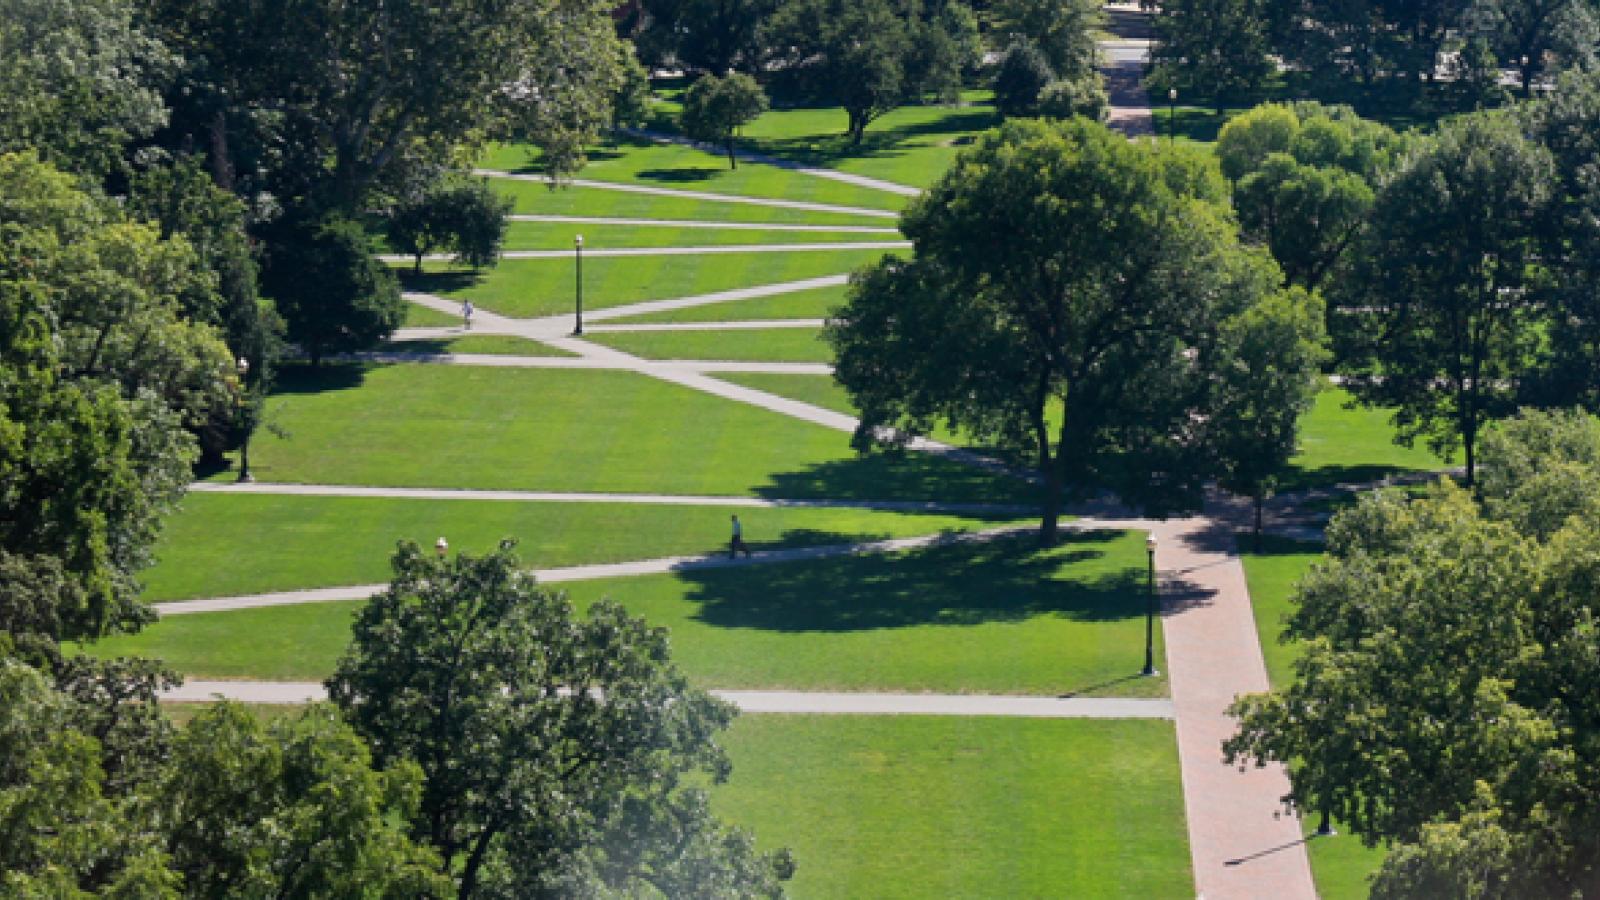 View of the Oval, on the main campus